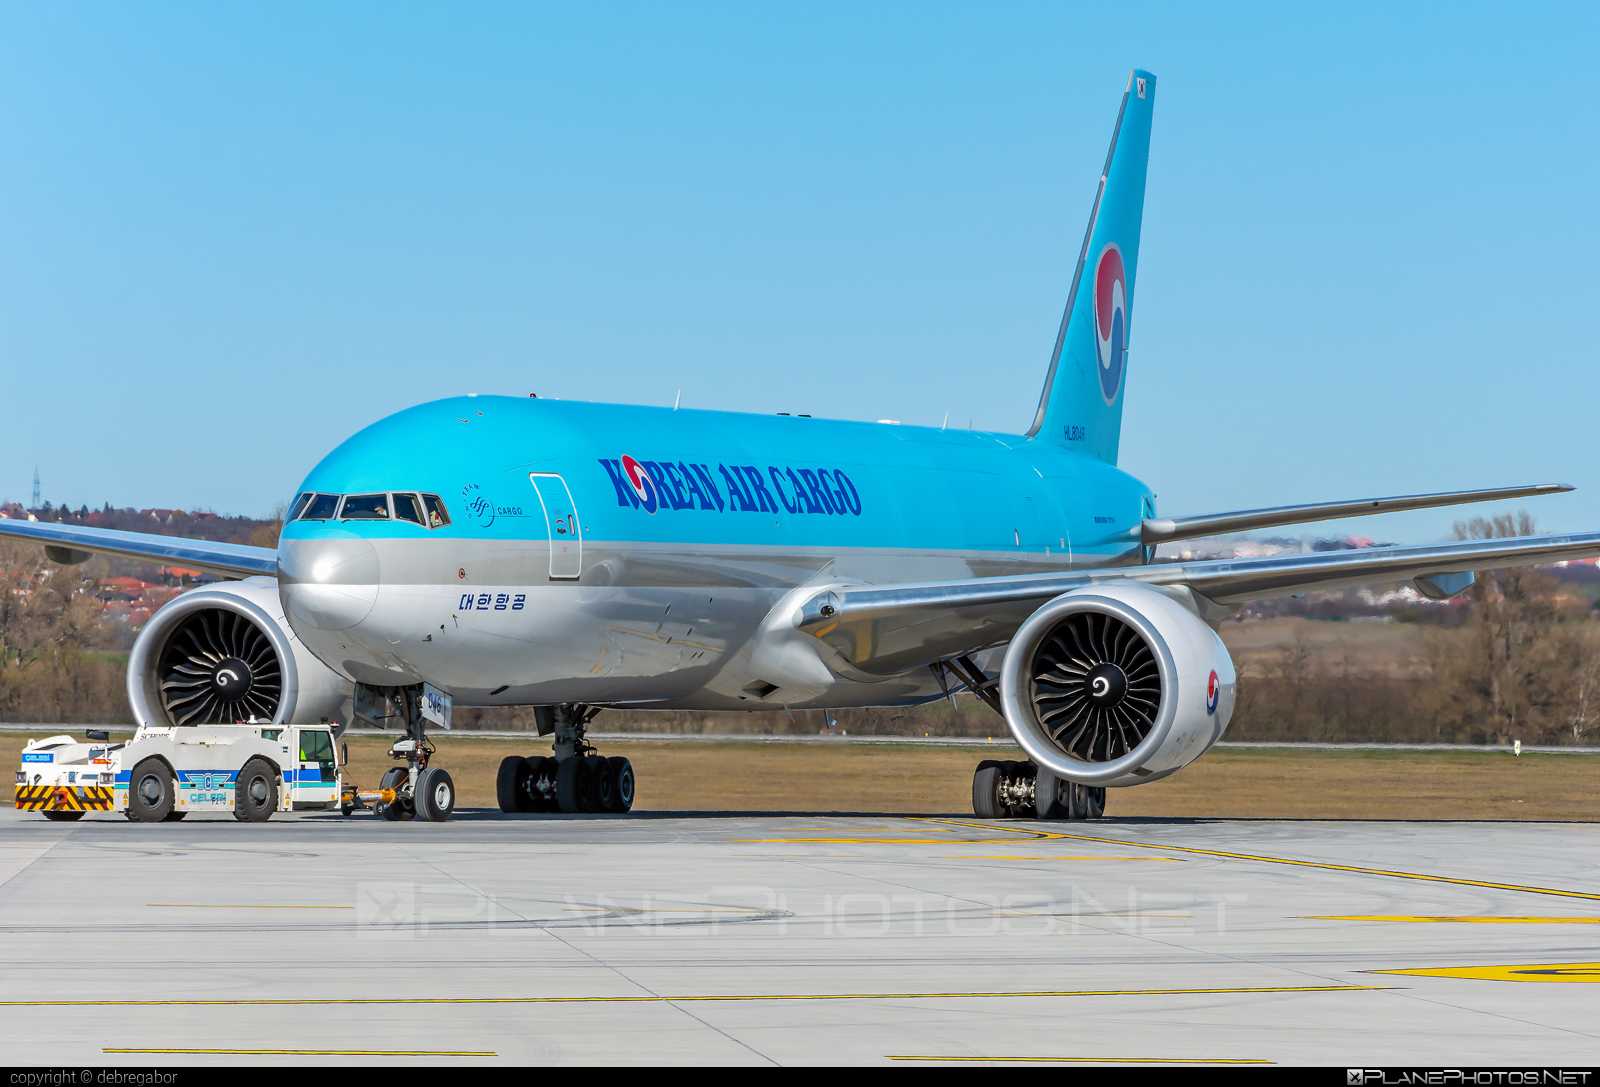 Boeing 777F - HL8046 operated by Korean Air Cargo #b777 #b777f #b777freighter #boeing #boeing777 #koreanair #koreanaircargo #tripleseven